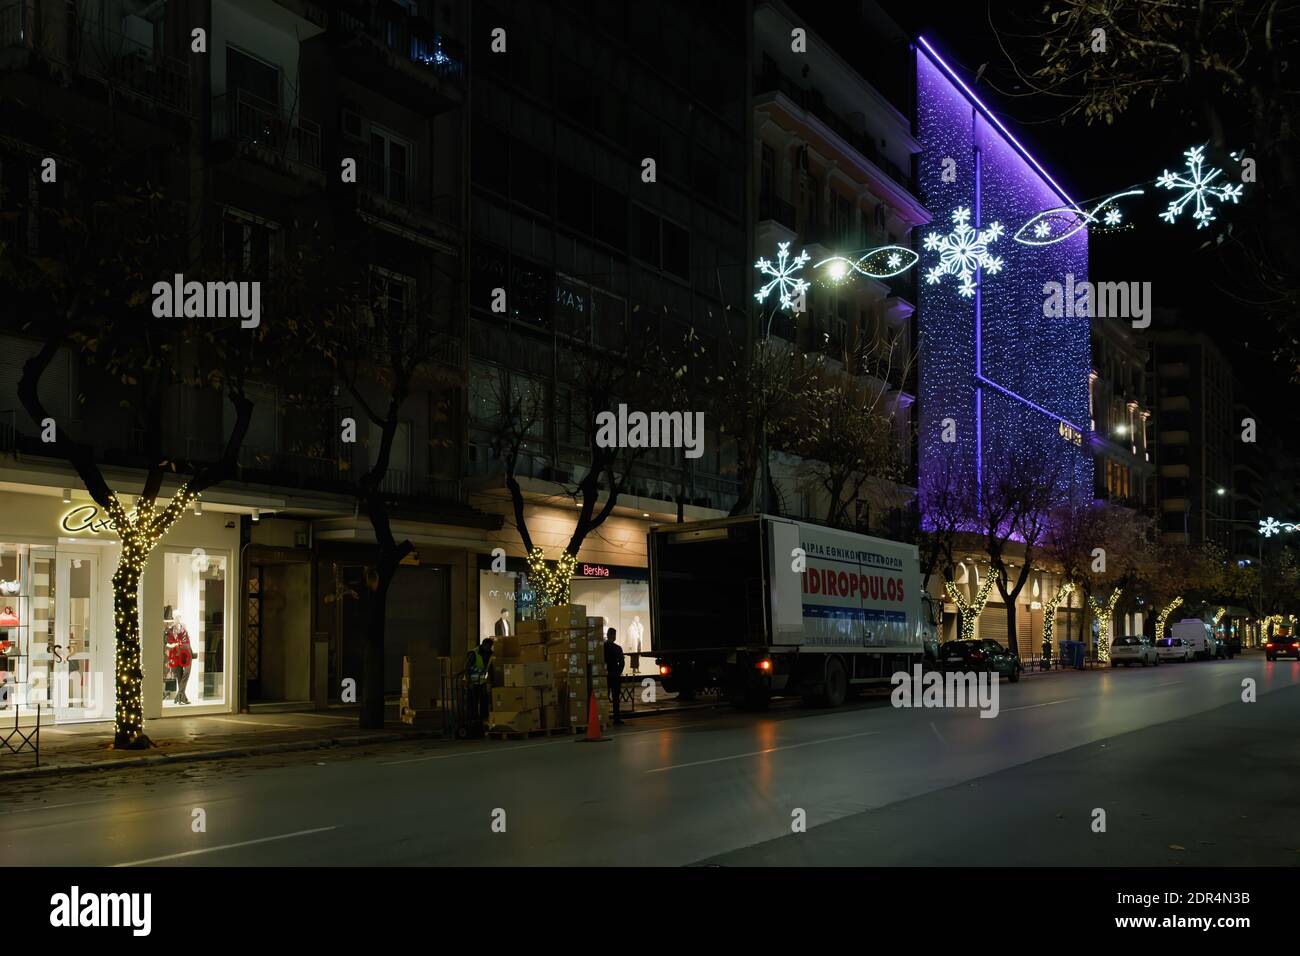 Thessaloniki, Greece - December 13 2020: Bershka brand shipment boxes unloading truck at night. Delivery men stacking packages of cardboards with clothes at Inditex Spanish retailer store entrance. Stock Photo